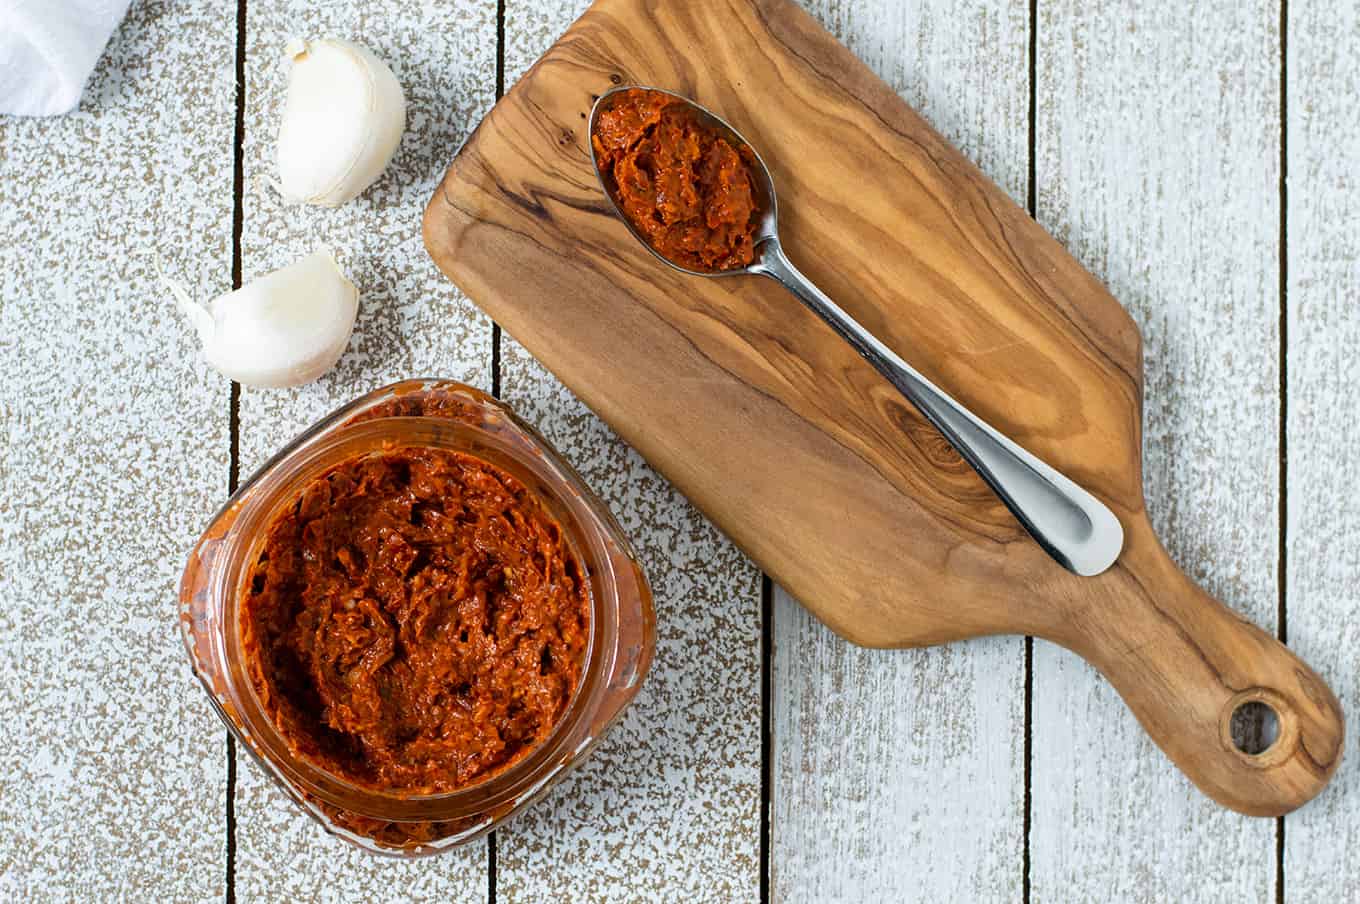 Top-down view of harissa paste in a small jar and a spoon of harissa paste on a table.